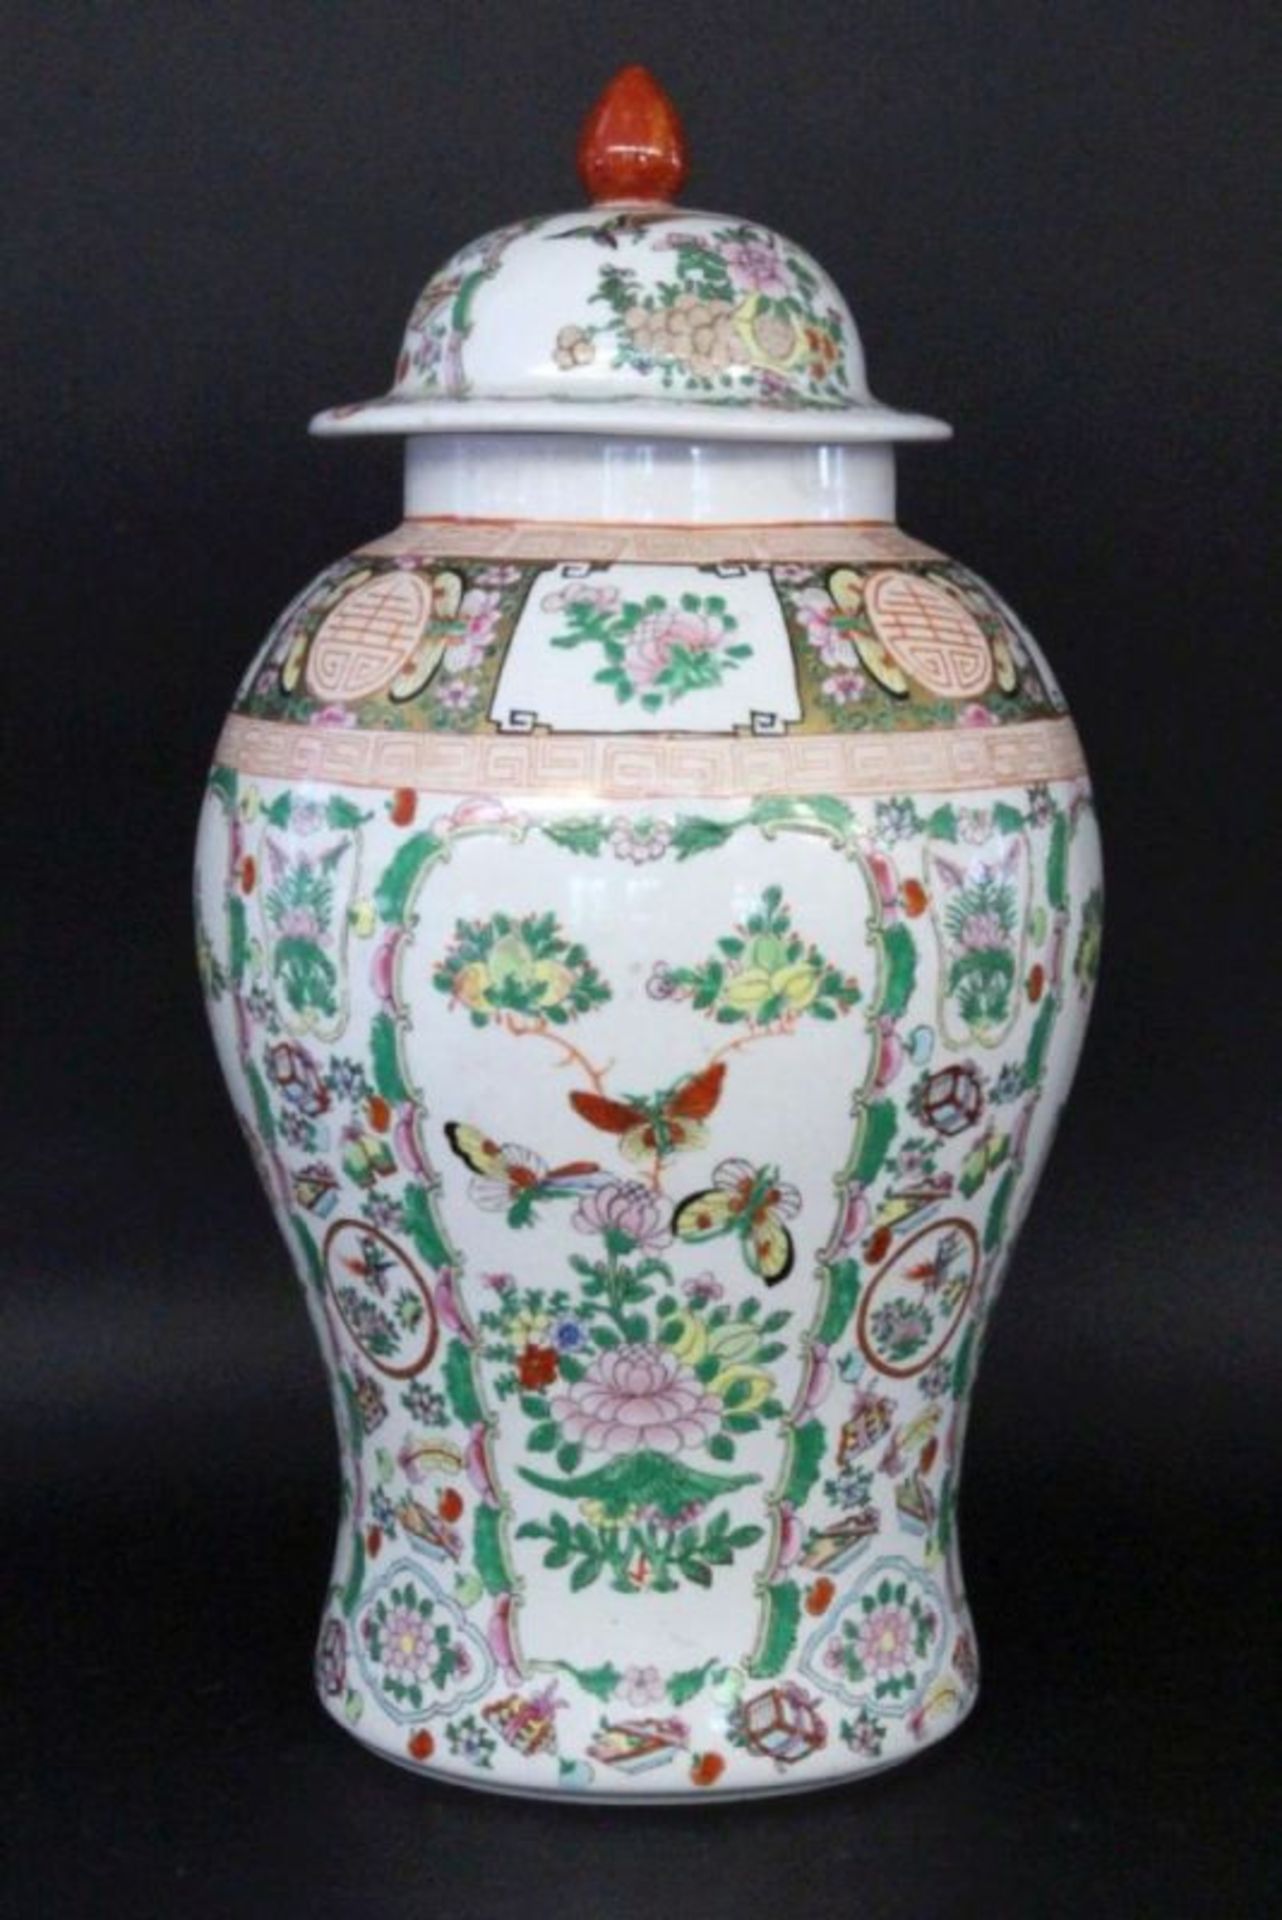 A FAMILLE VERTE LIDDED VASE China, 20th century Porcelain with coloured painting in Cantonstyle.